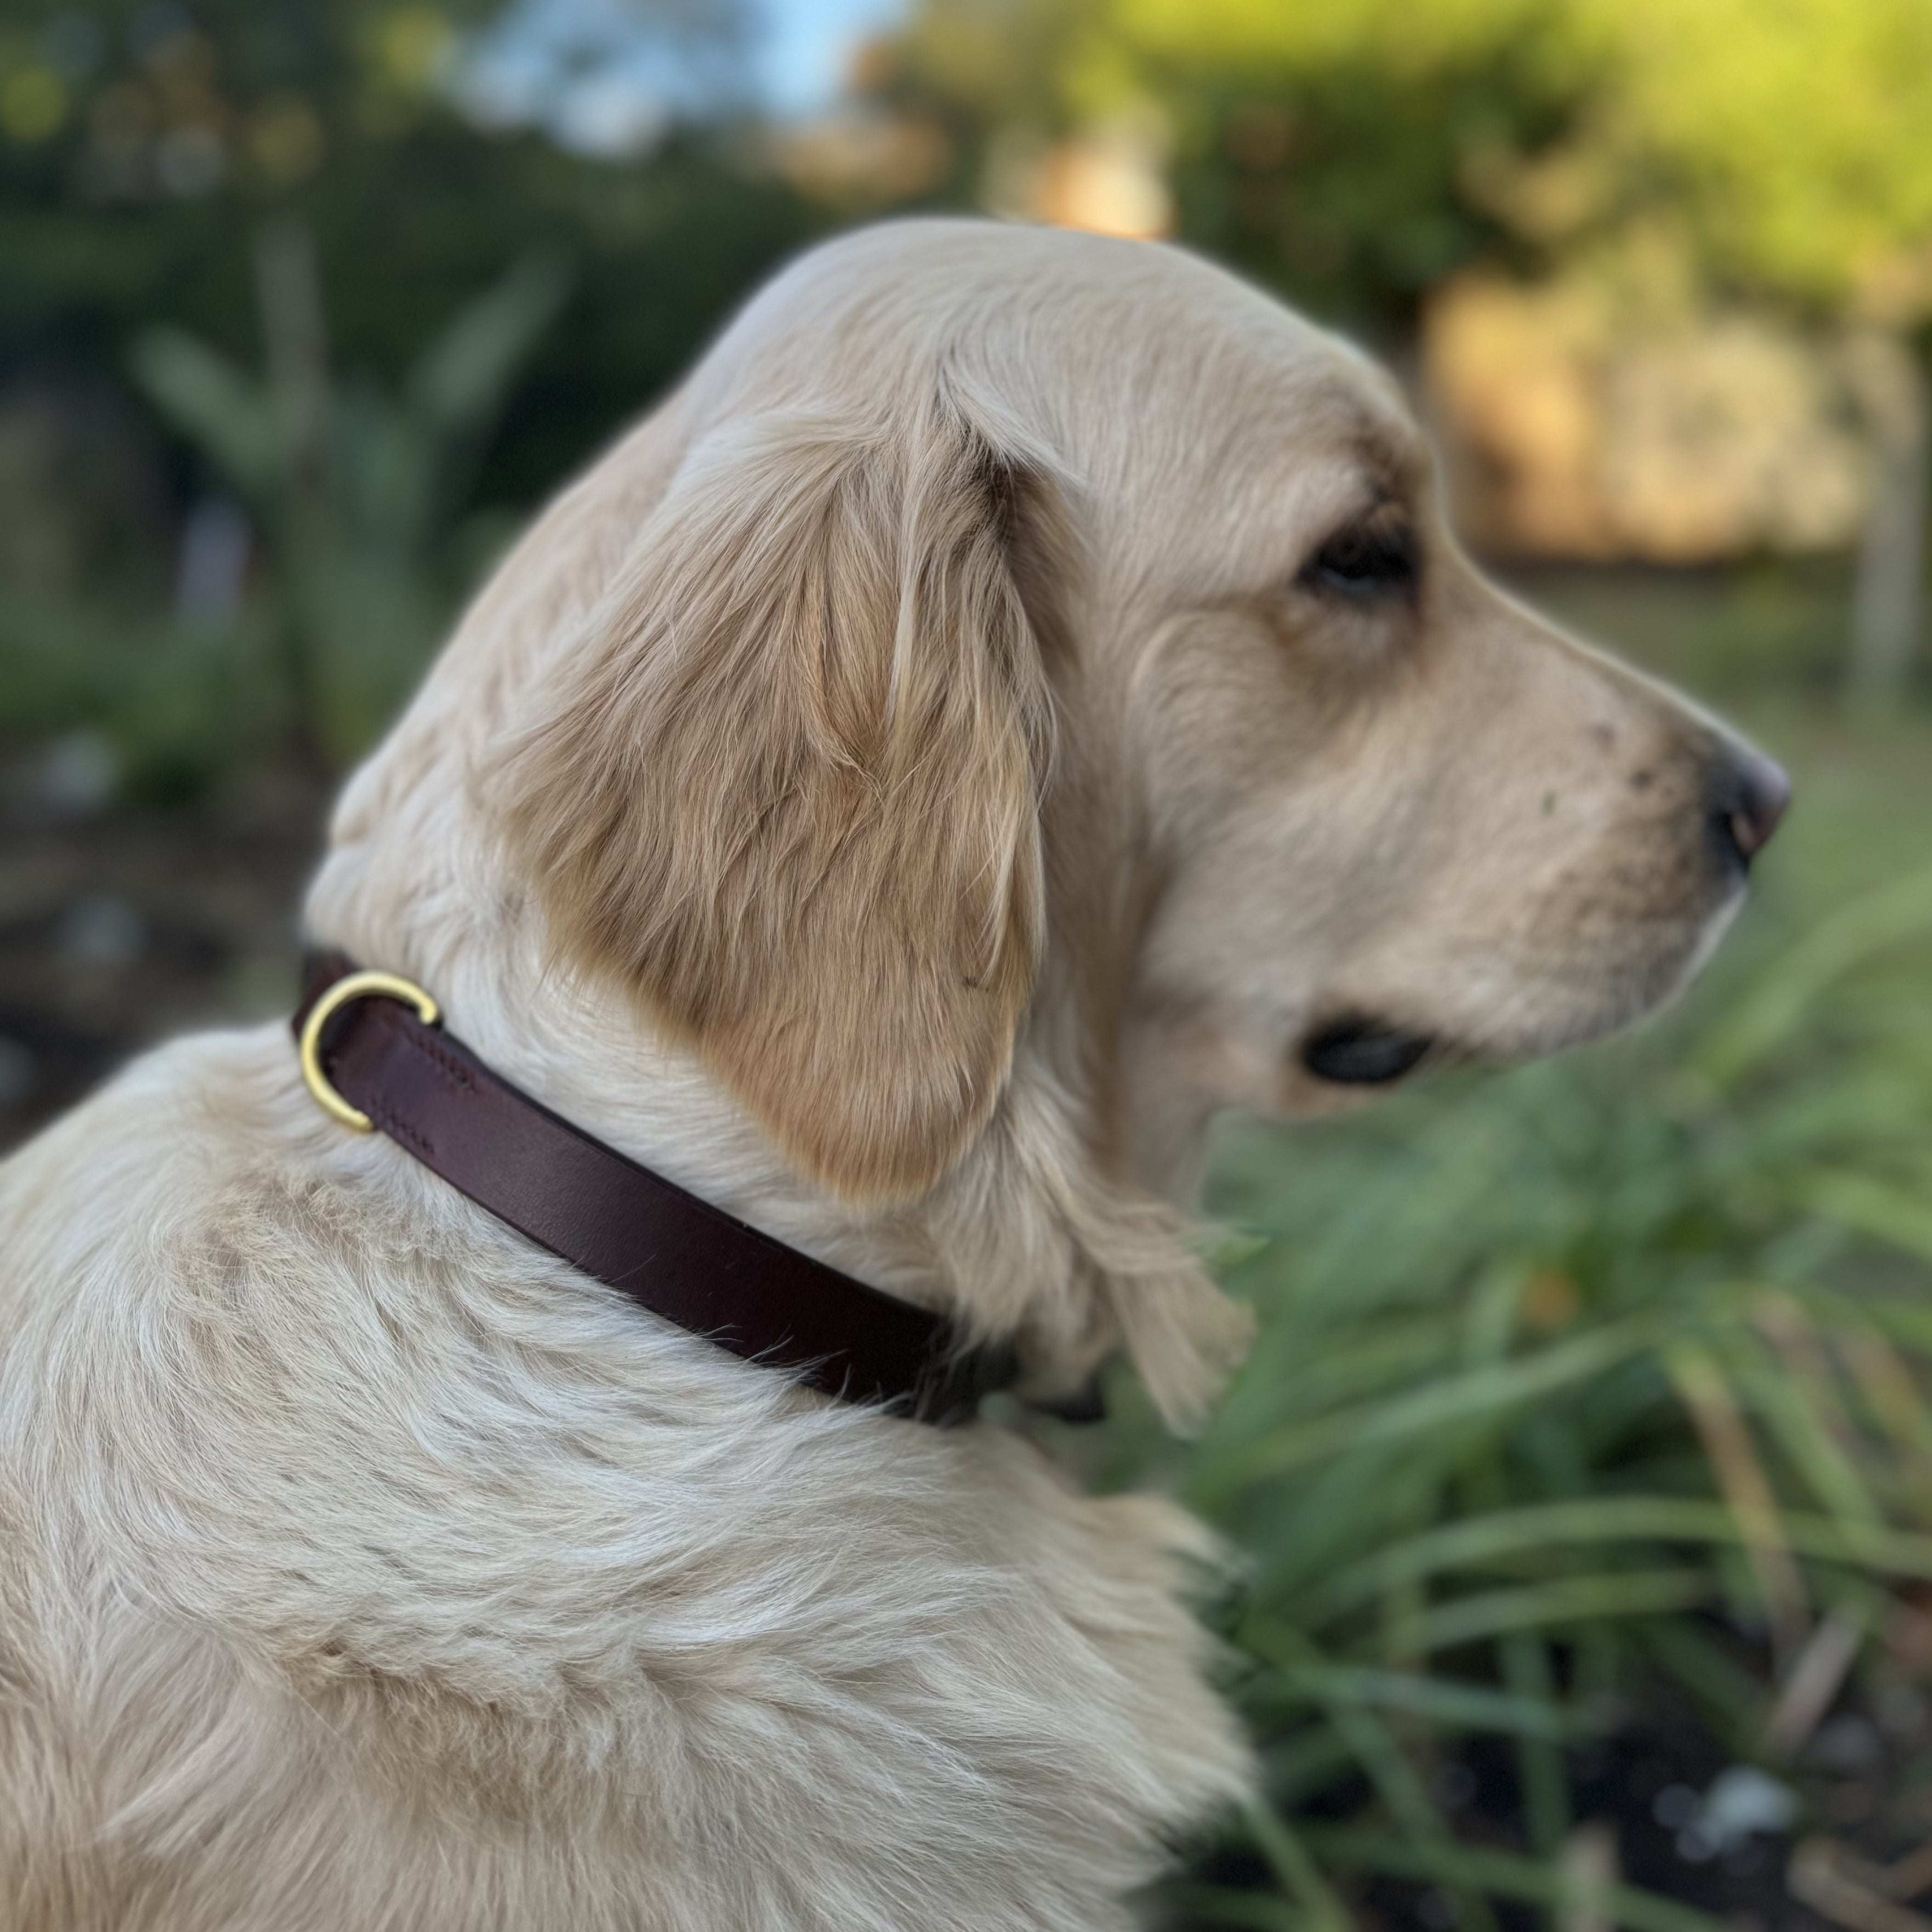 A Golden Retriever with a wavy, light-golden coat sits in a garden, facing to the right. The dog wears a dark brown Georgie Paws Bald Collar Chicory adorned with antique brass hardware. The background is blurred, featuring green plants, trees, and a glimpse of blue sky. The scene has a serene and peaceful ambiance.